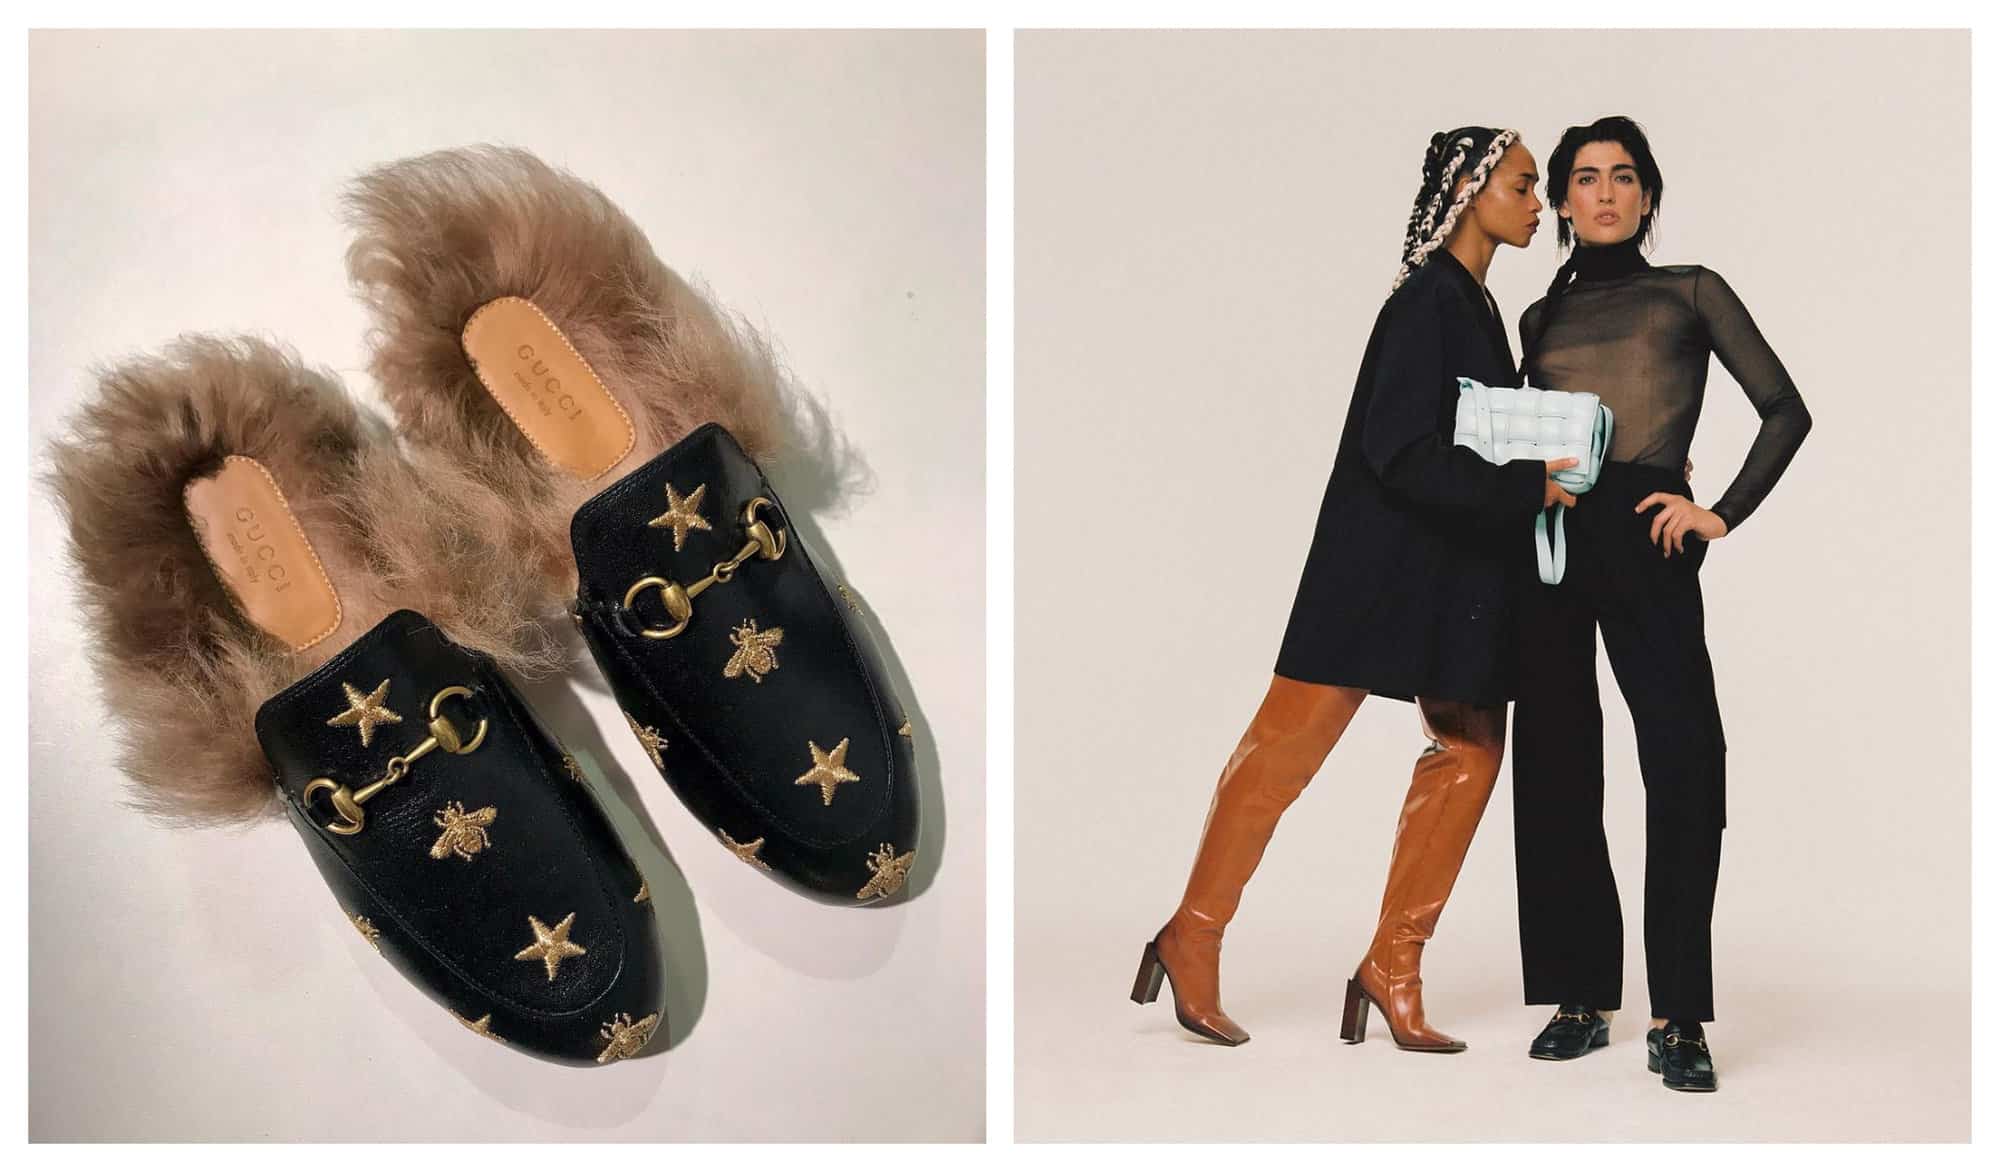 Left: A picture of a limited edition black Gucci loafers in fur. Right: 2 models wearing black poses for the camera.